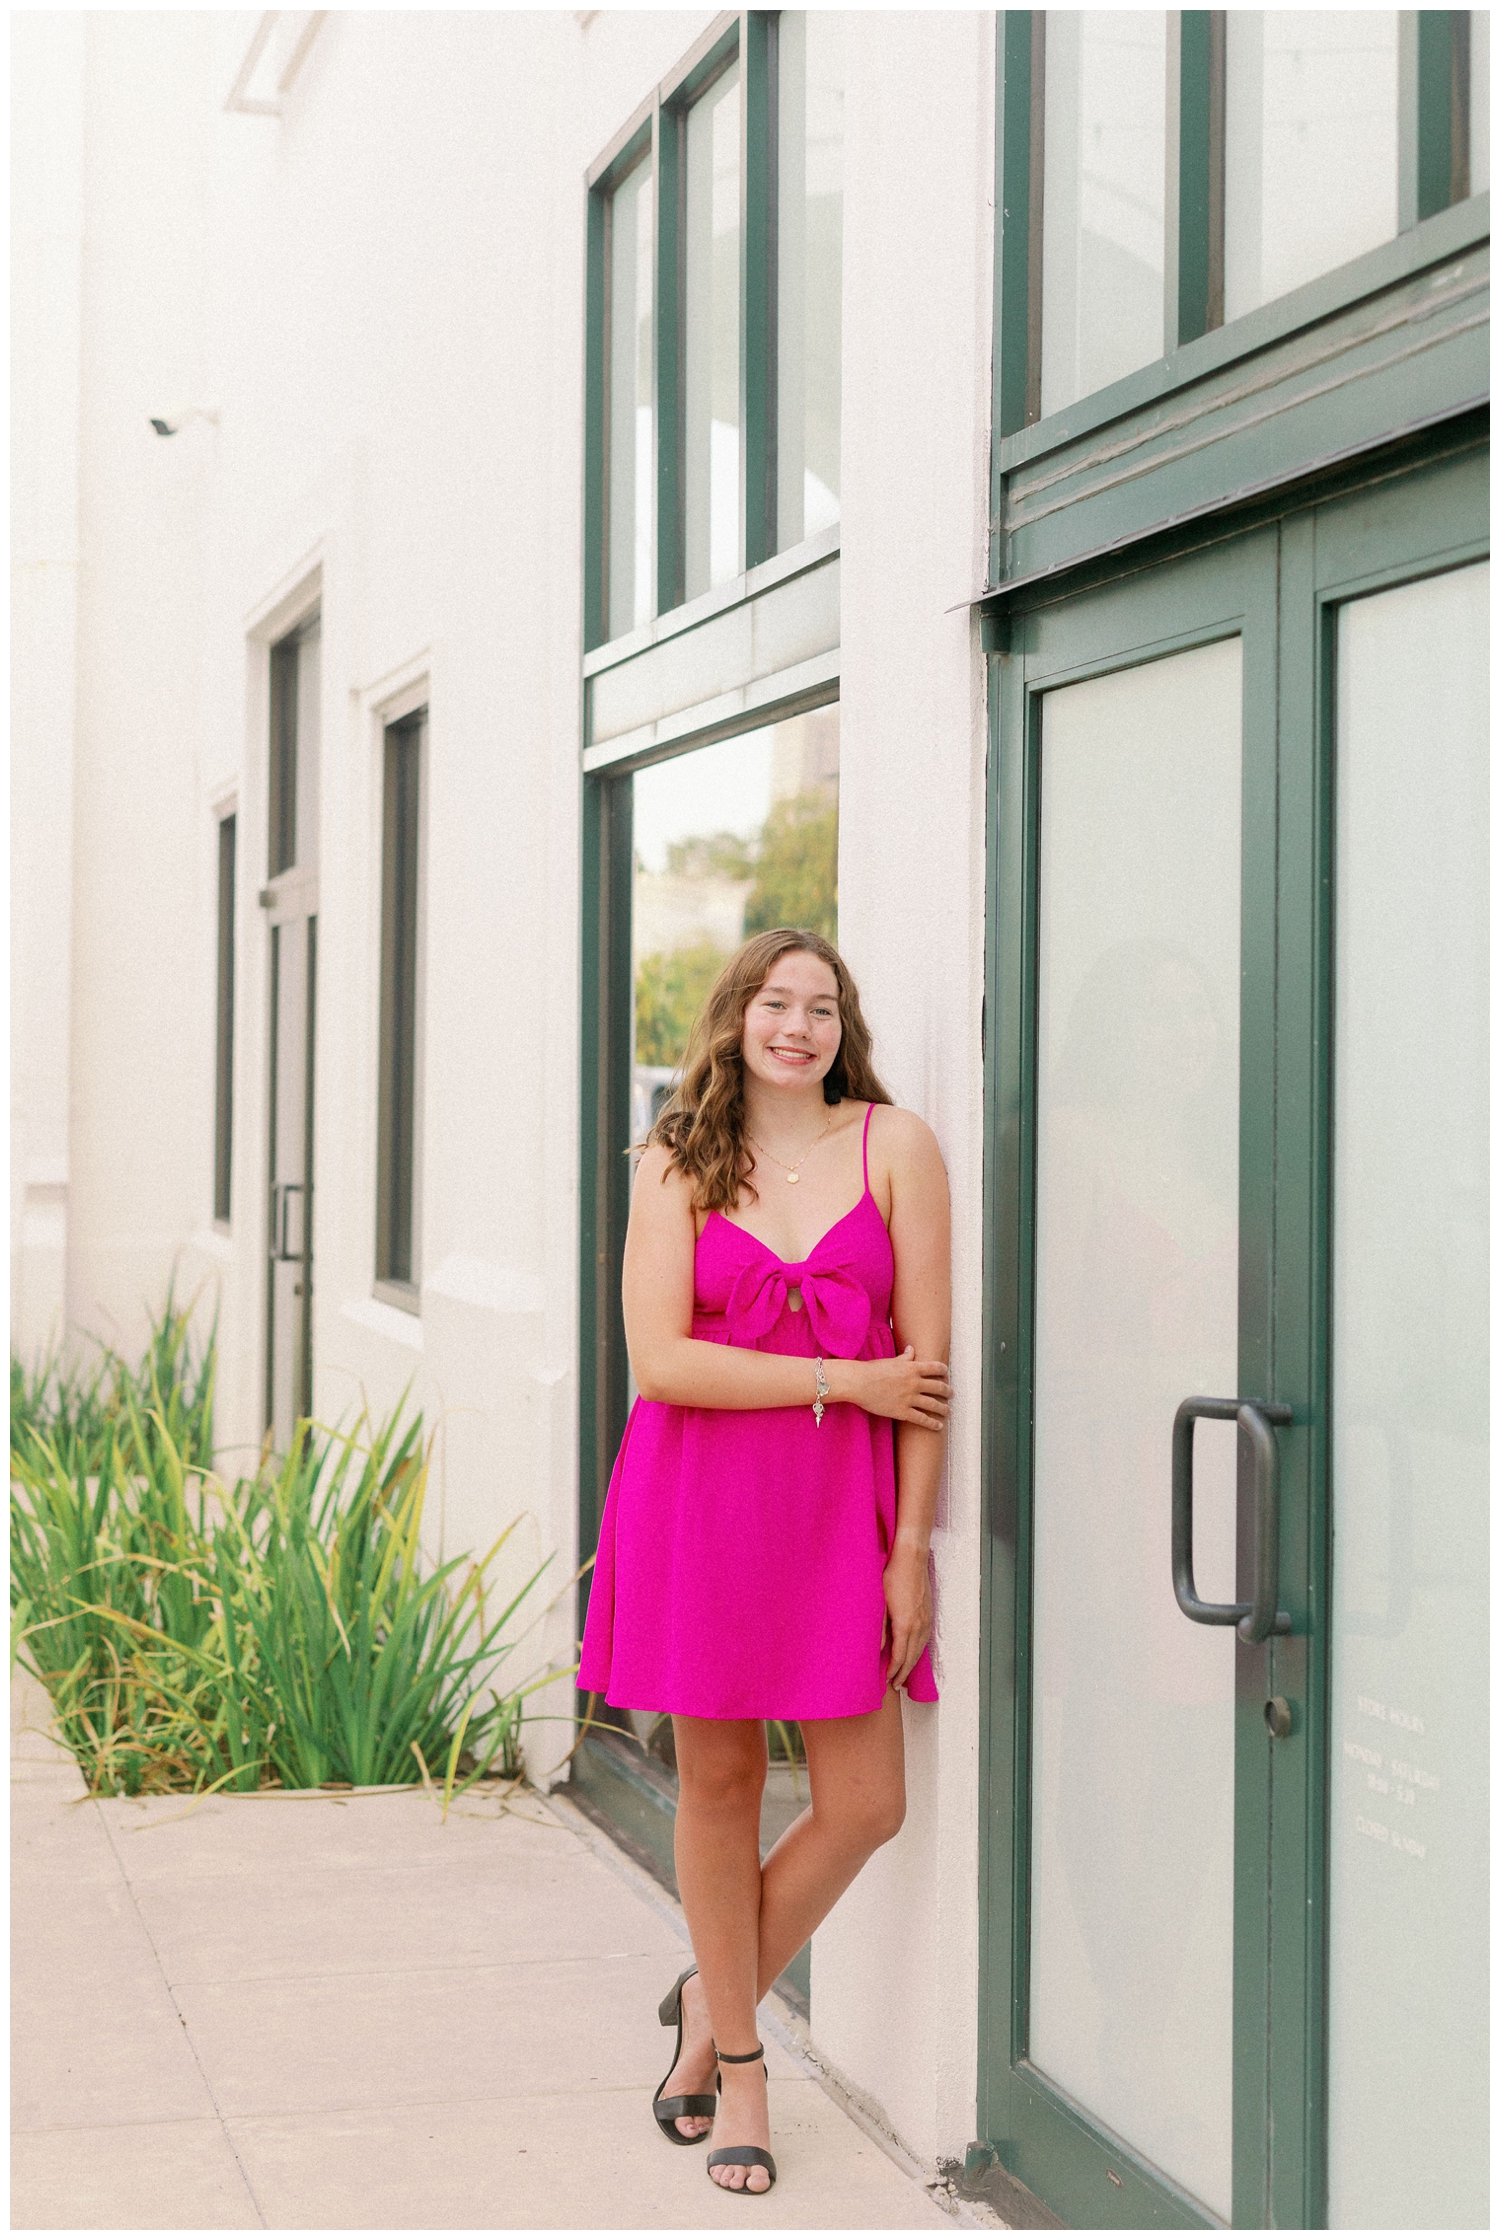 Houston senior in hot pink dress leaning against a wall at Uptown Park